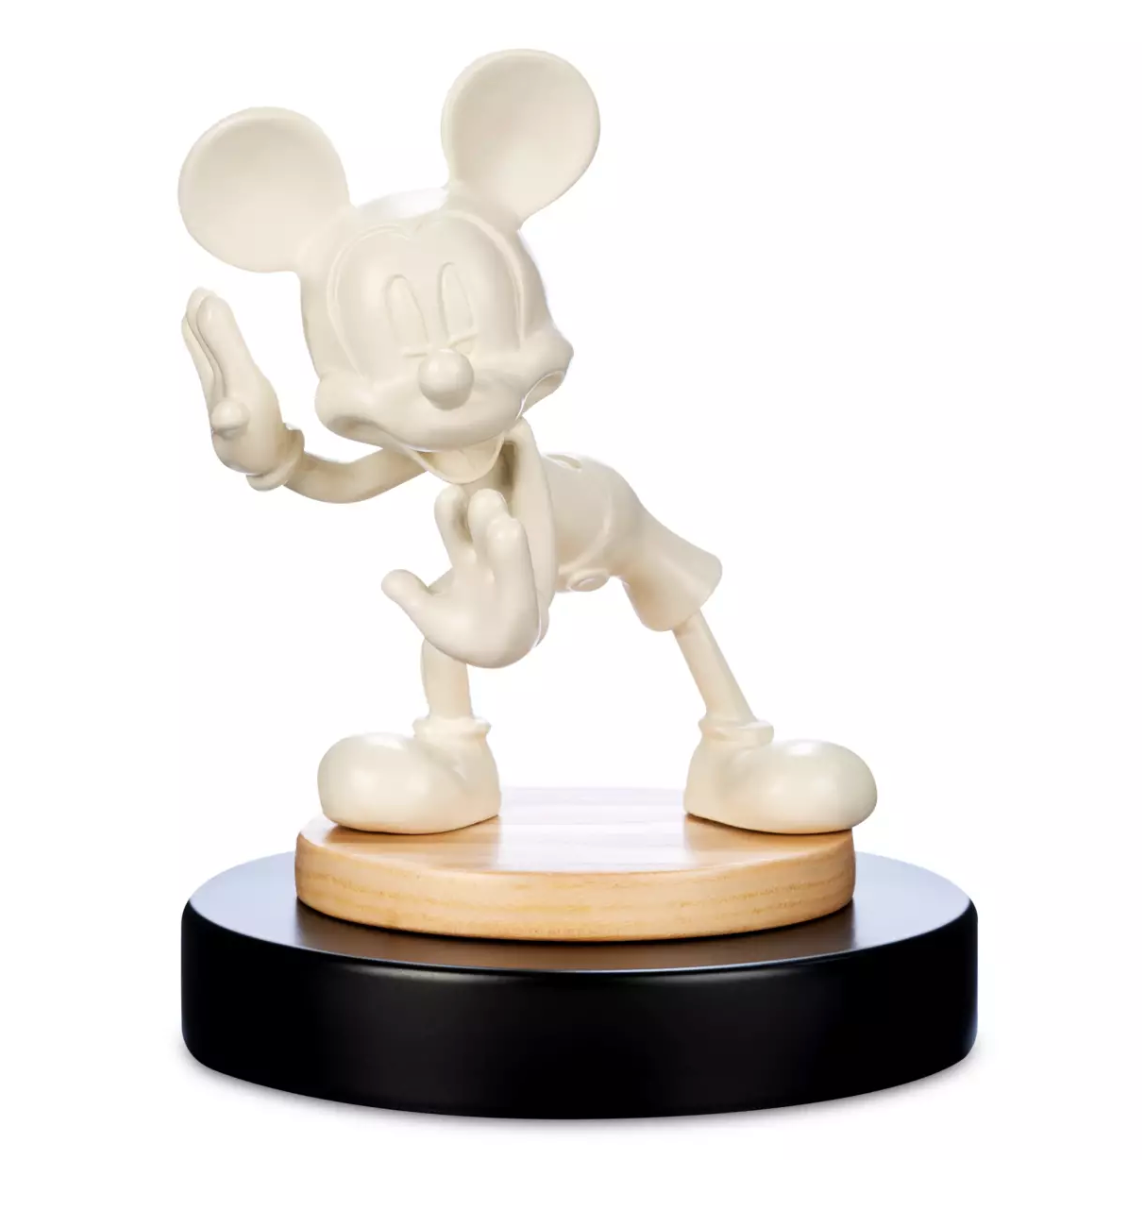 Disney Parks Home Collection Expressive Mickey Pose Figure New with Tag